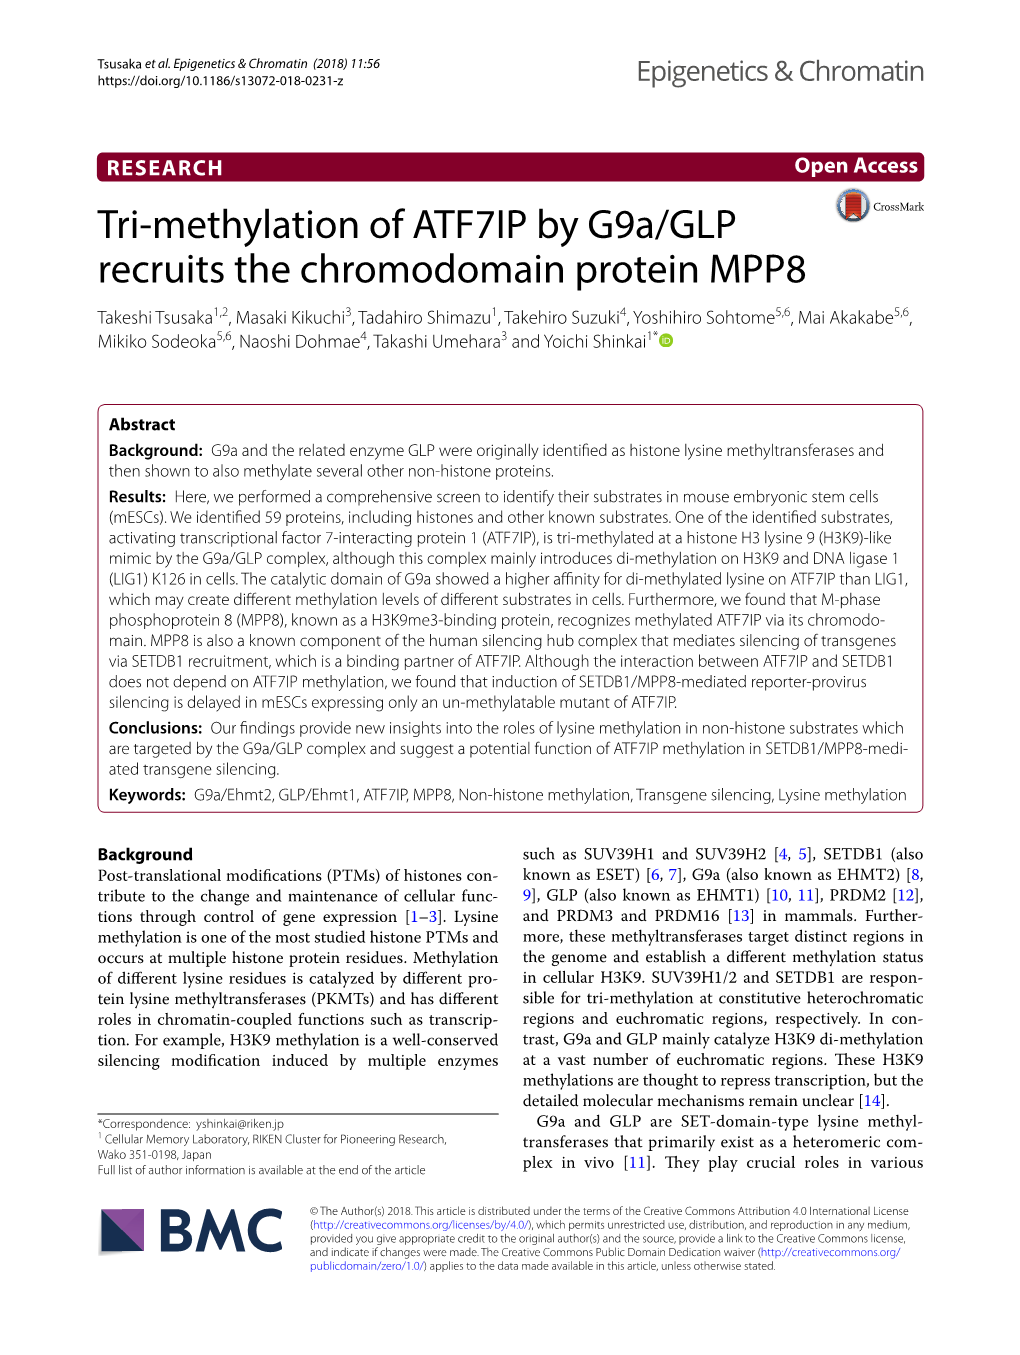 Tri-Methylation of ATF7IP by G9a/GLP Recruits the Chromodomain Protein